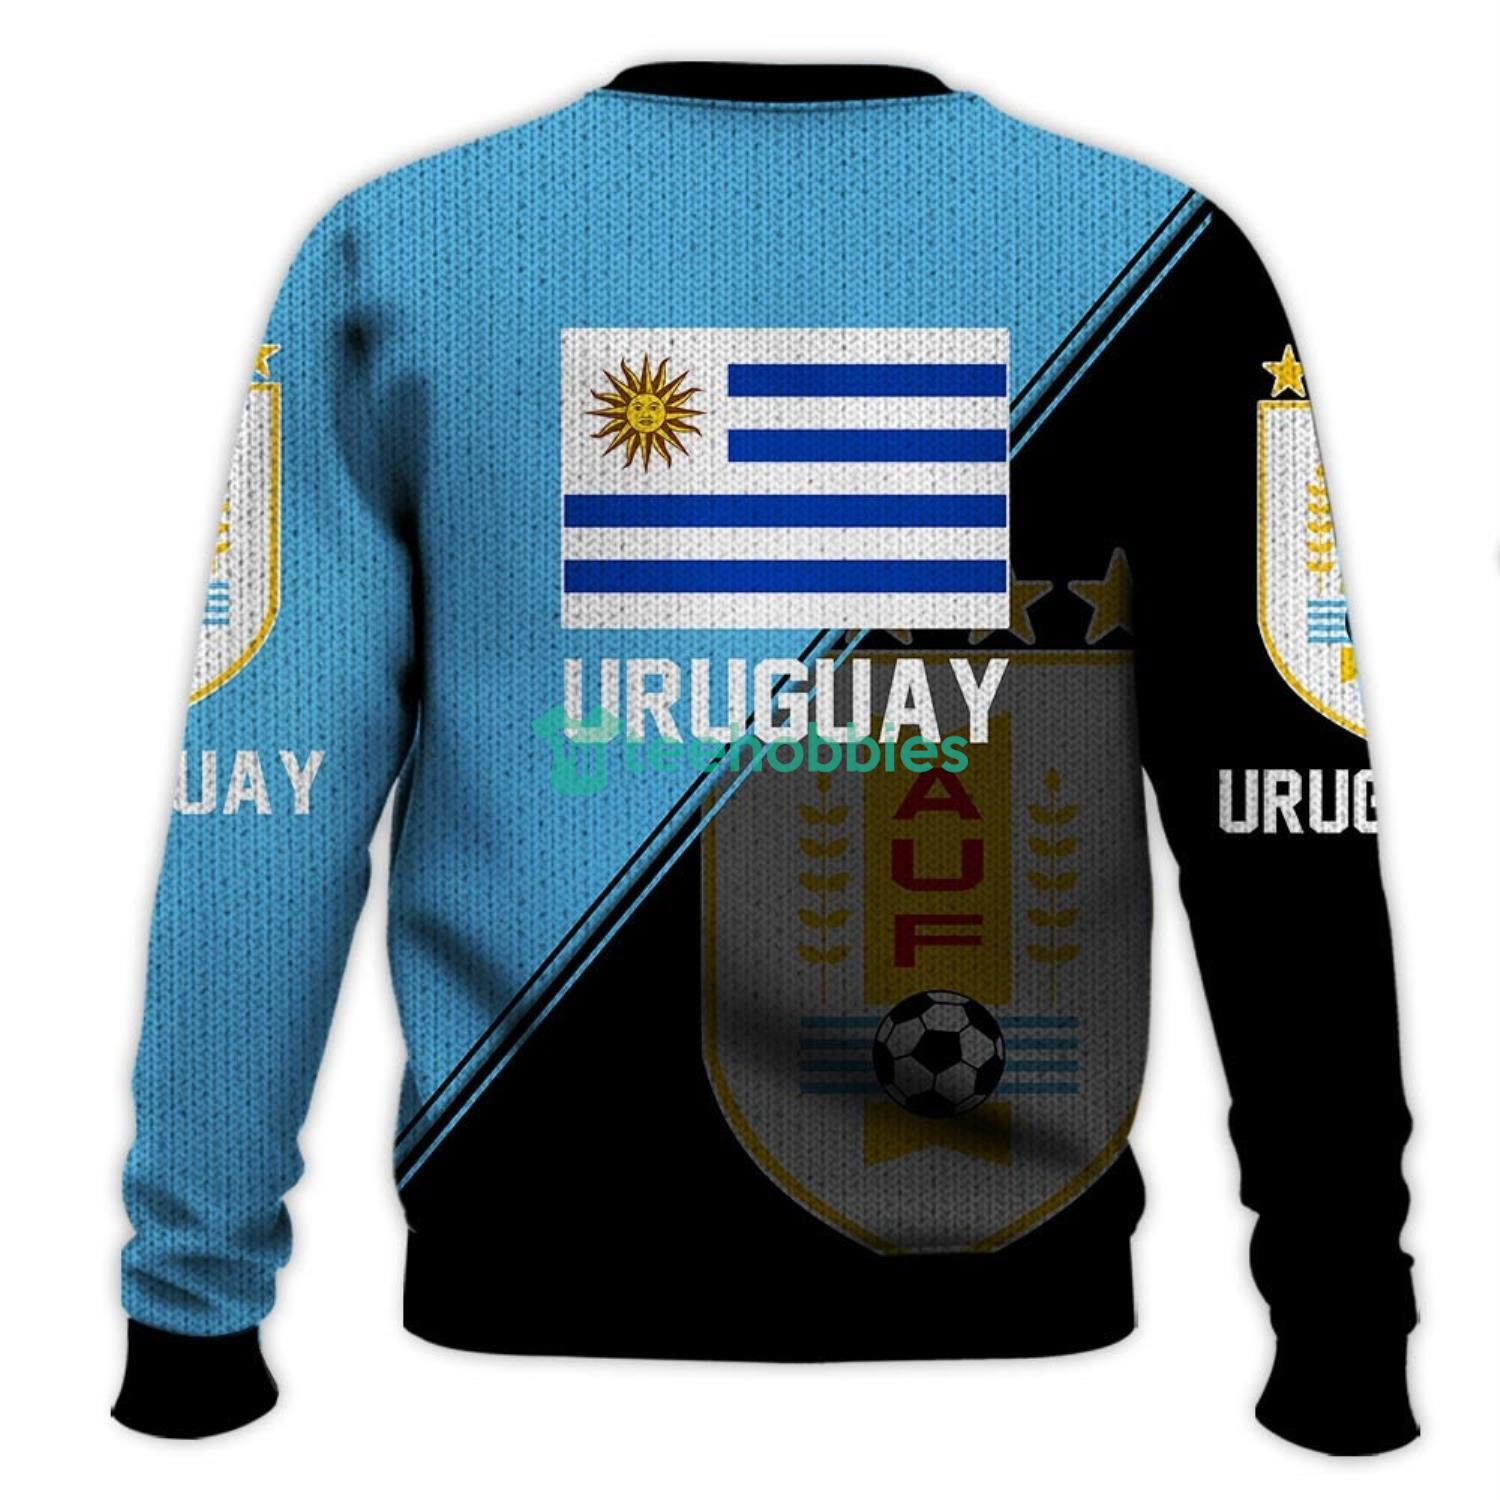 Uruguay National Soccer Team Qatar World Cup 2022 Champions Soccer Team 3D All Over Printed Shirt Product Photo 3